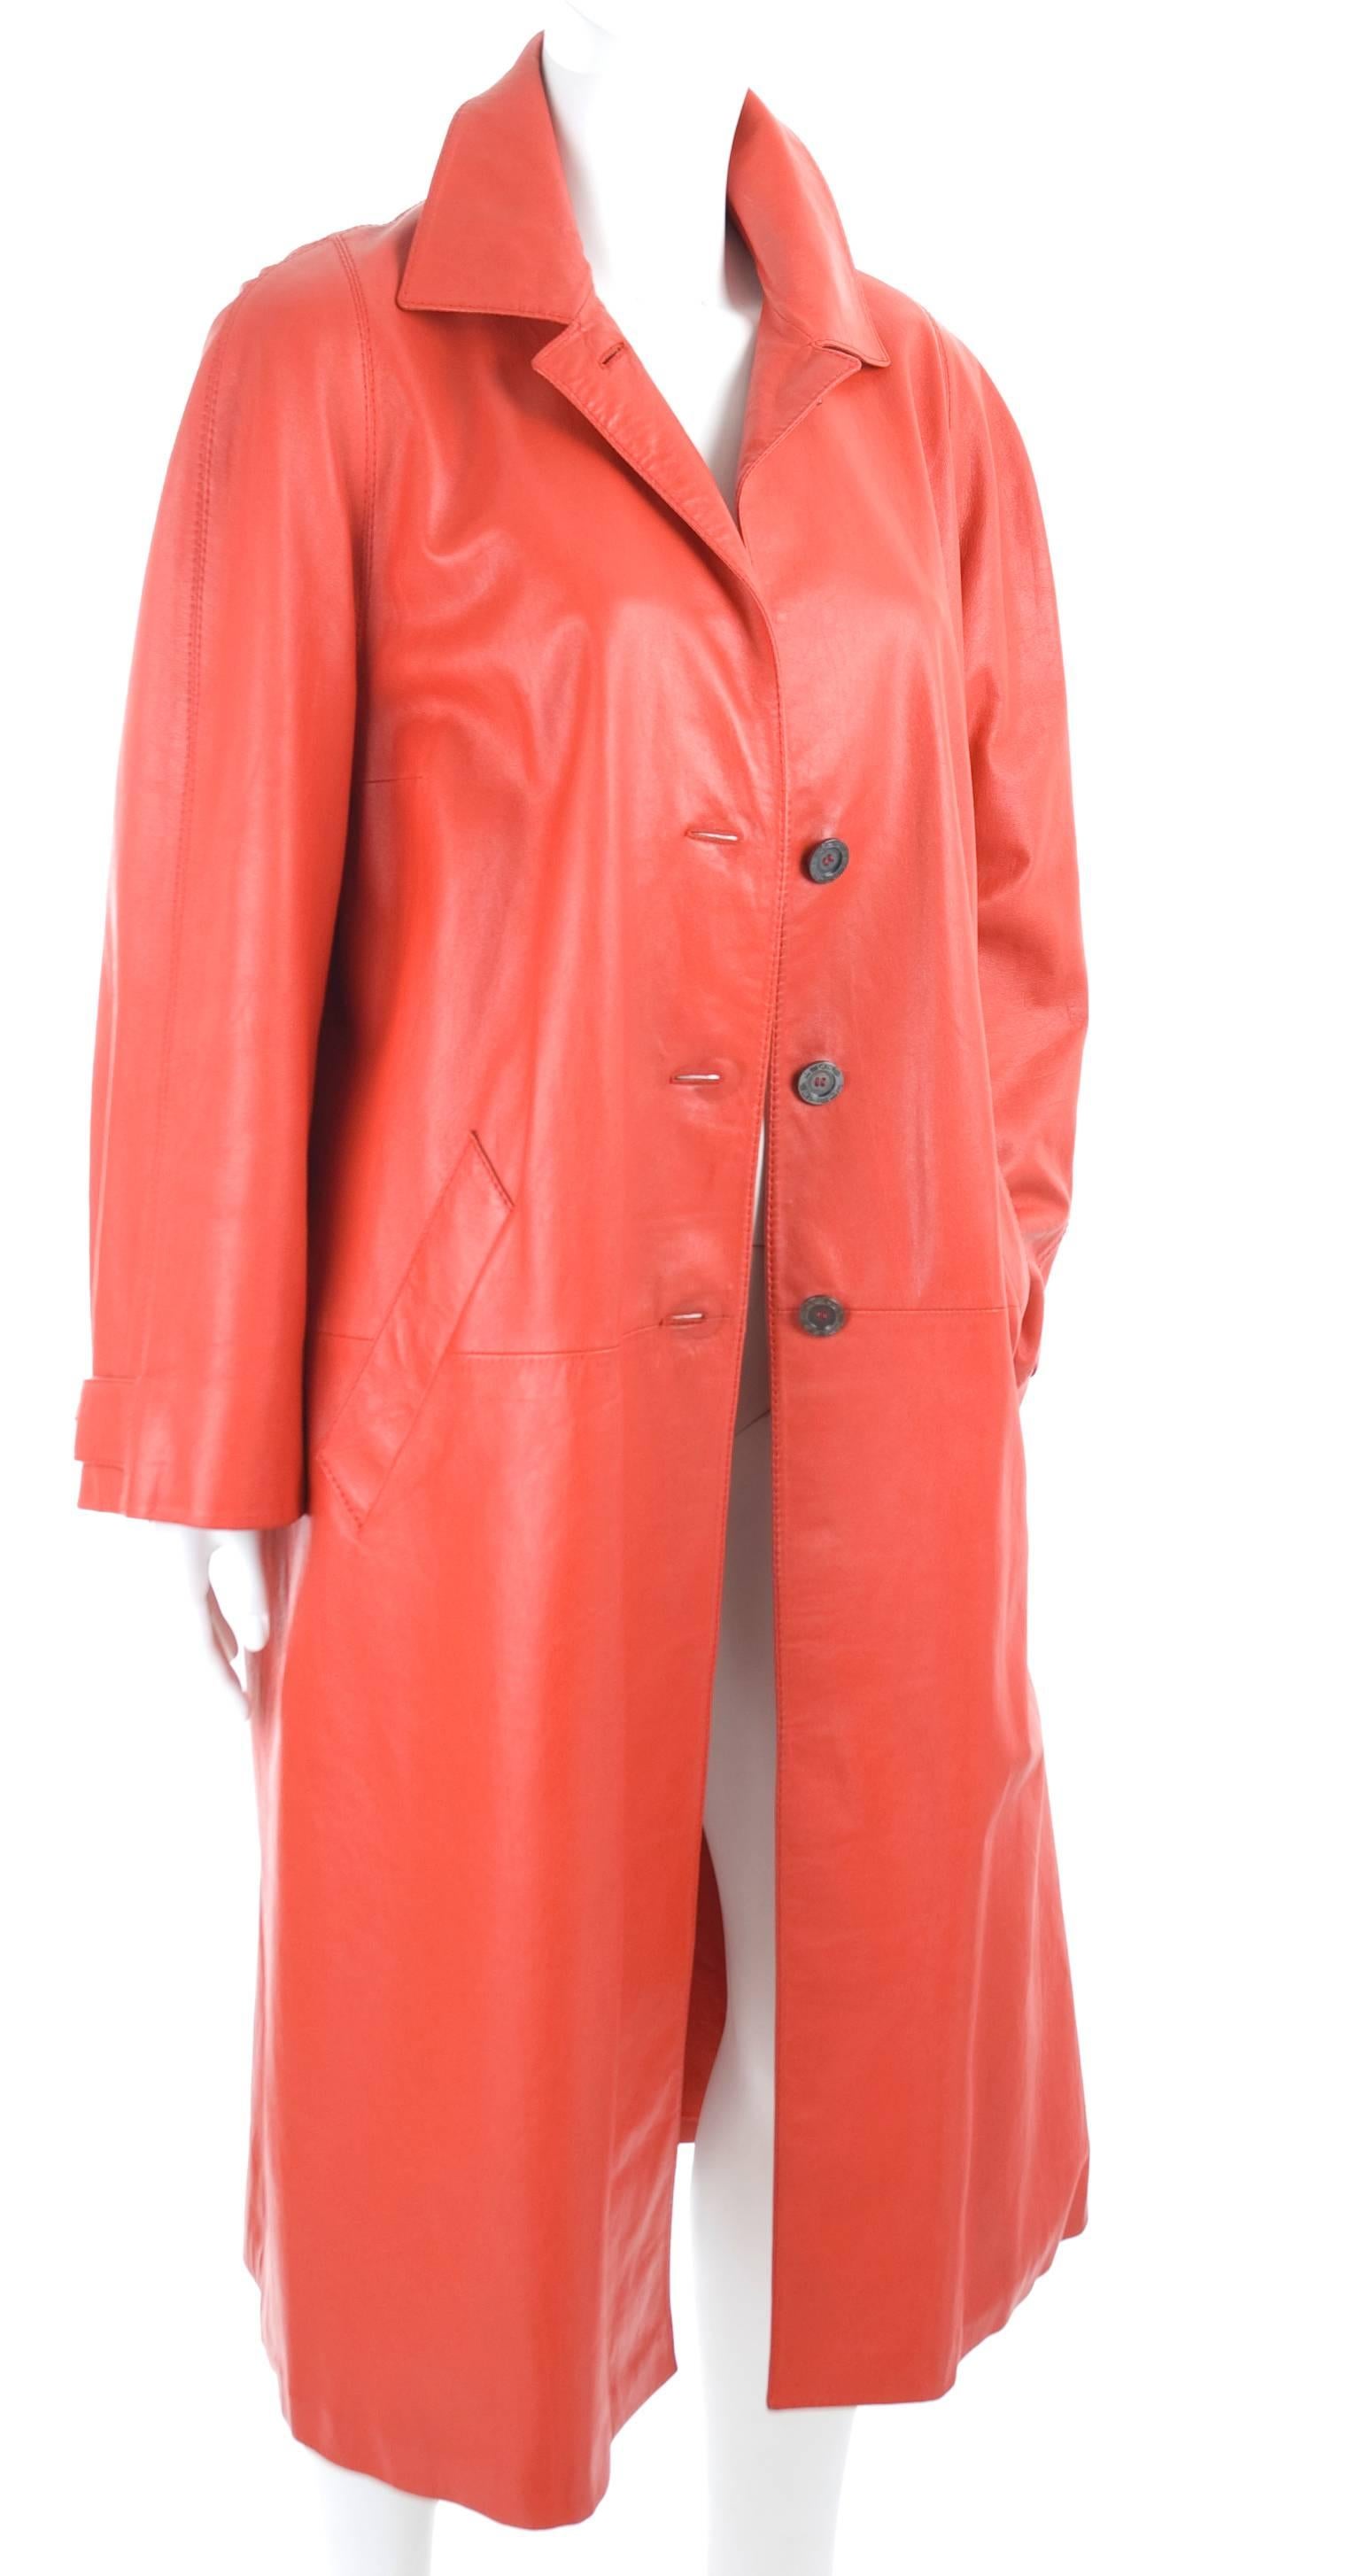 Hermes Sport Red Leather Coat.
A-line with a long slit in the back.
Size label is missing - it fits like a medium.
The condition is excellent - The buttons have left a imprint around the buttonholes, other than this is the condition